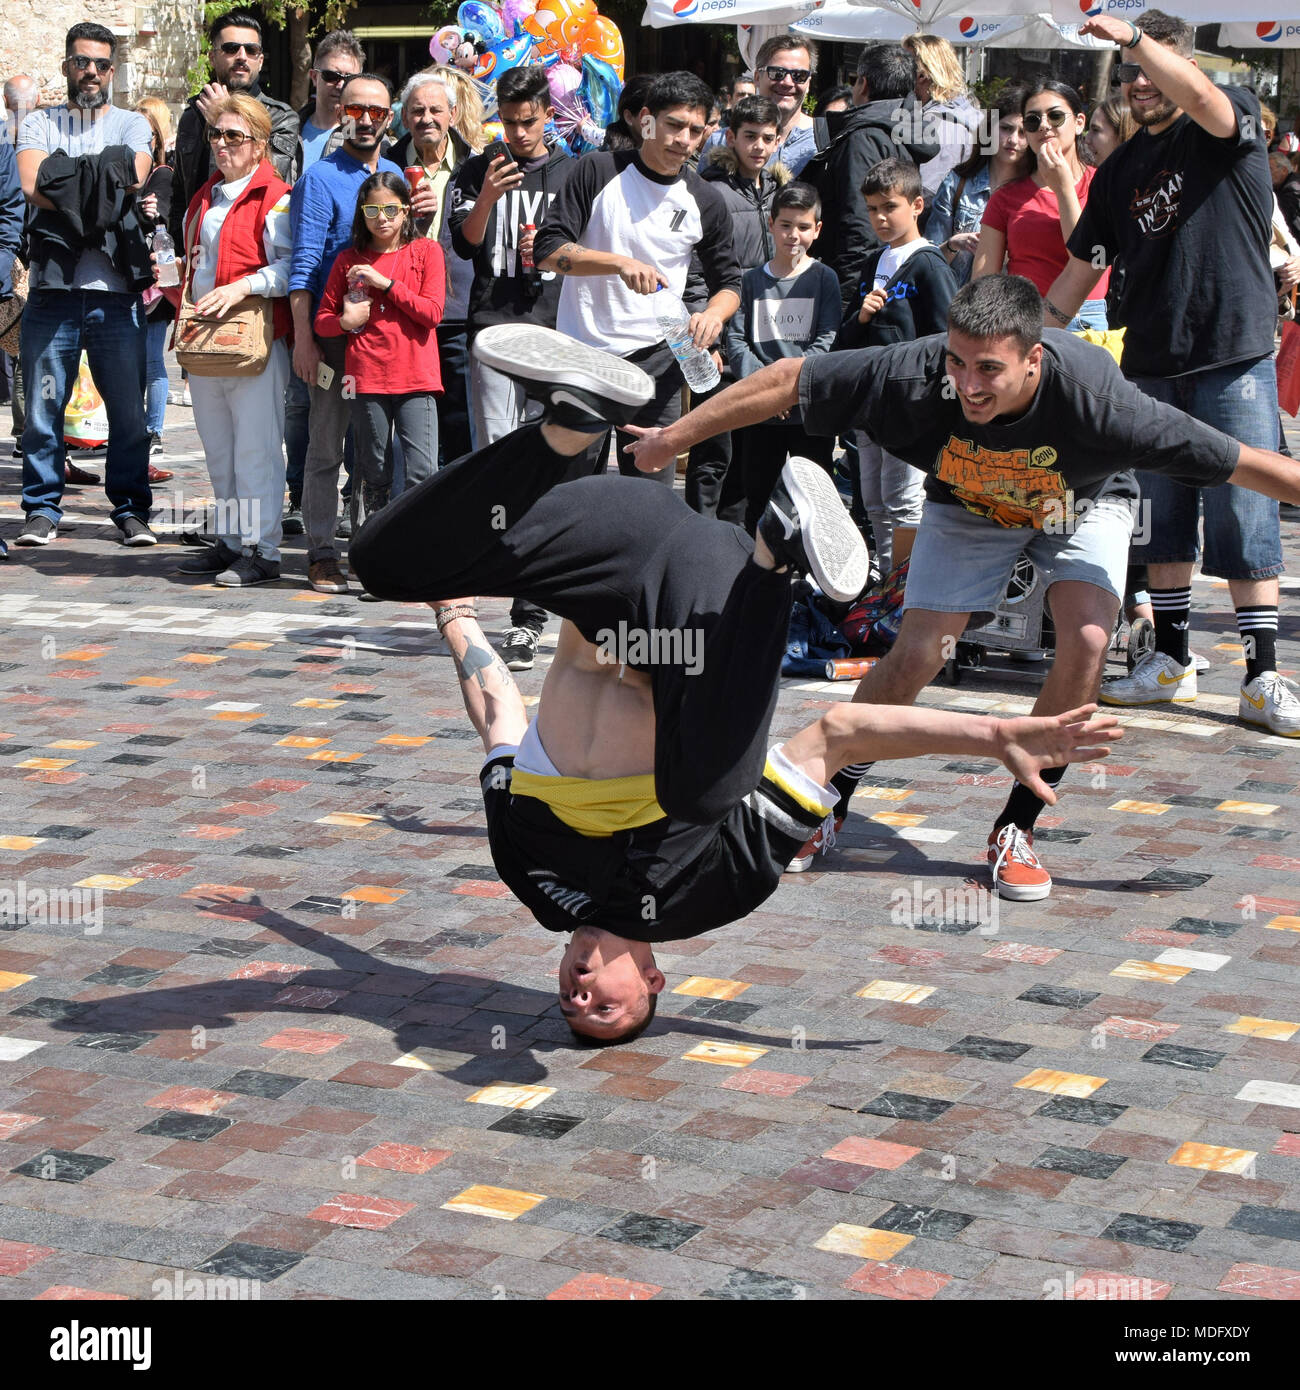 ATHENS, GREECE - APRIL 1, 2018: Friends cheering at breakdancer as he busts a headspin move in public square with crowd of people. Street dance youth  Stock Photo